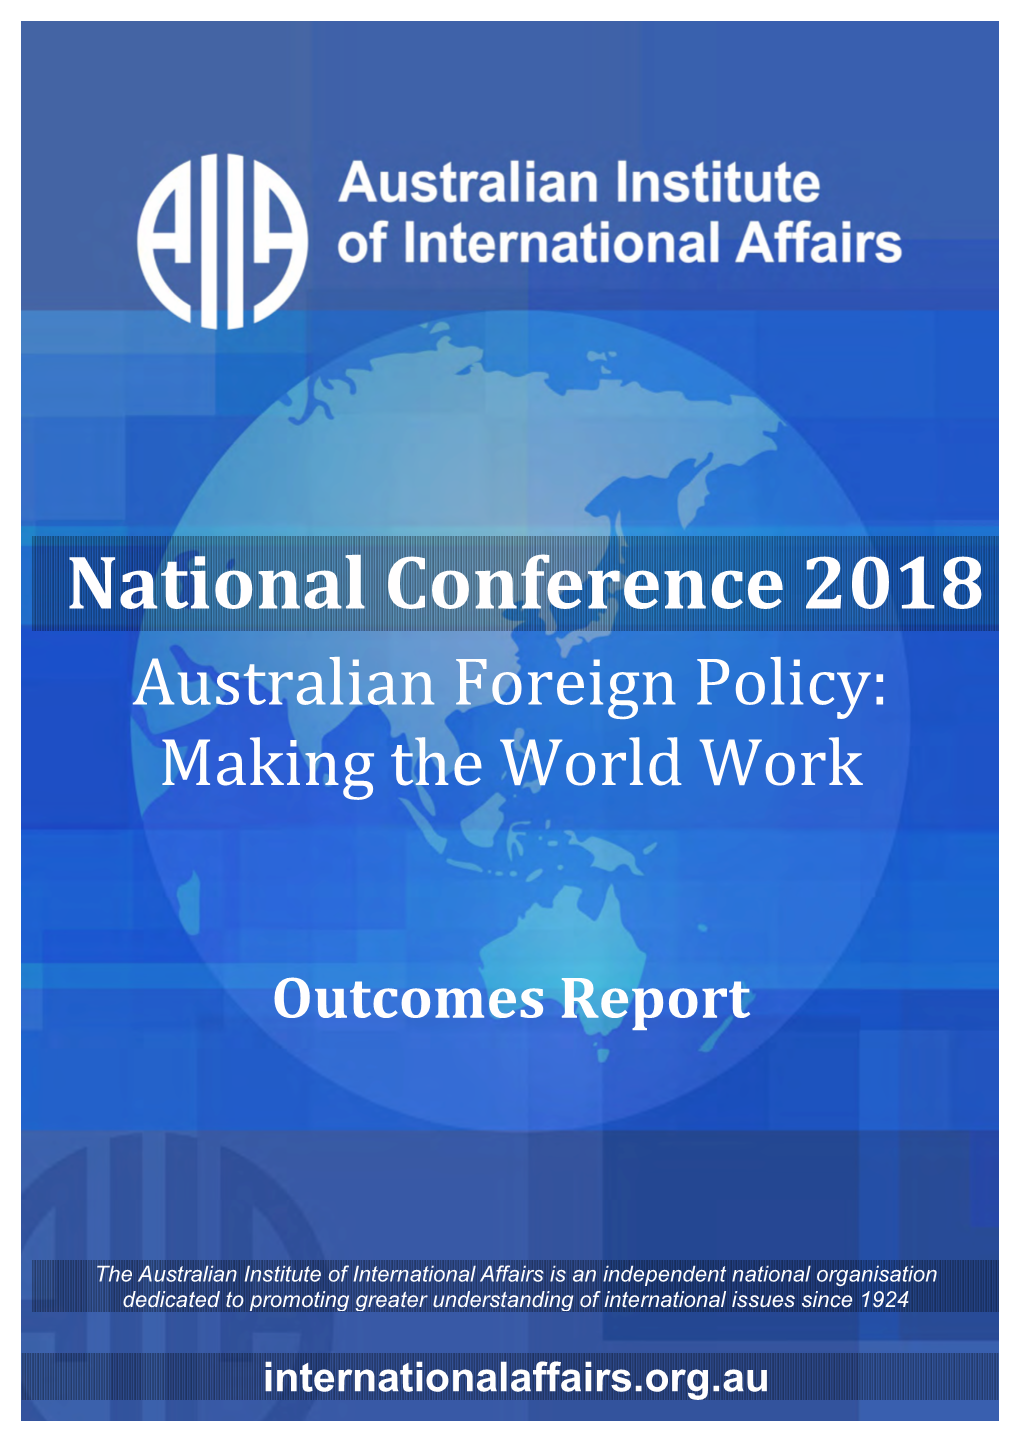 AIIA National Conference 2018 – Outcomes Report